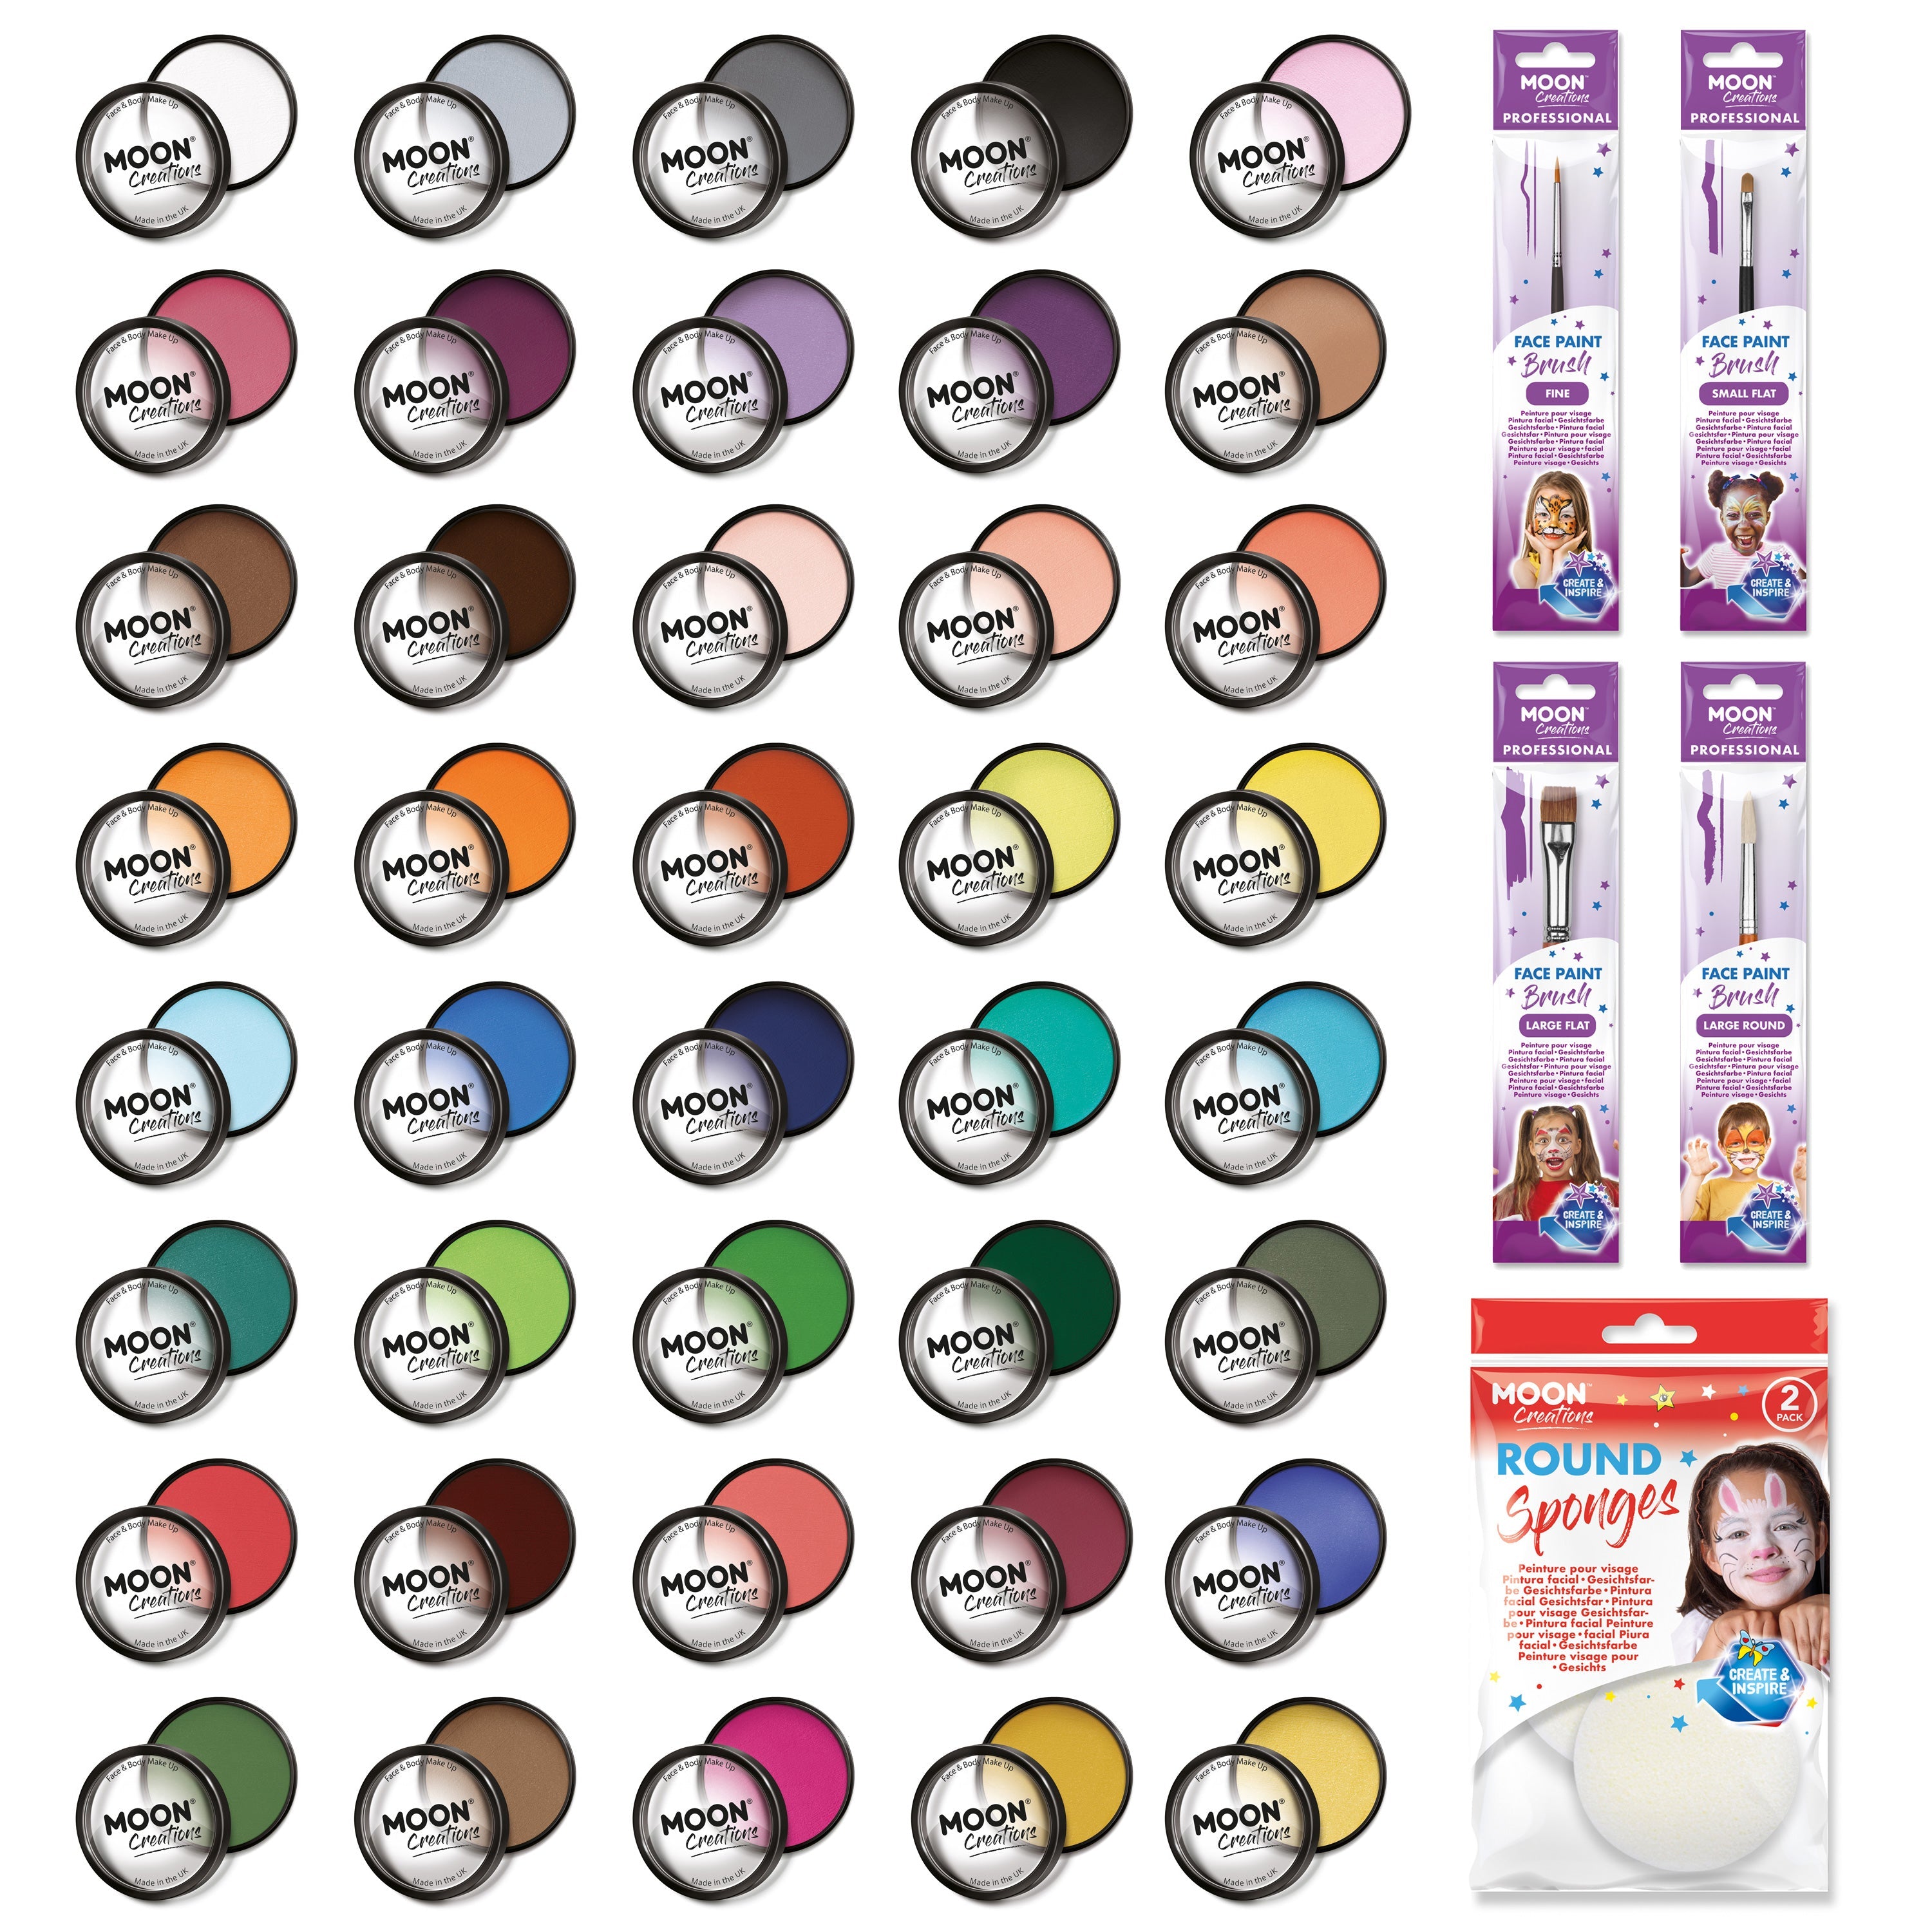 All 40 - Professional Face Paint. Cosmetically certified, FDA & Health Canada compliant, cruelty free and vegan.